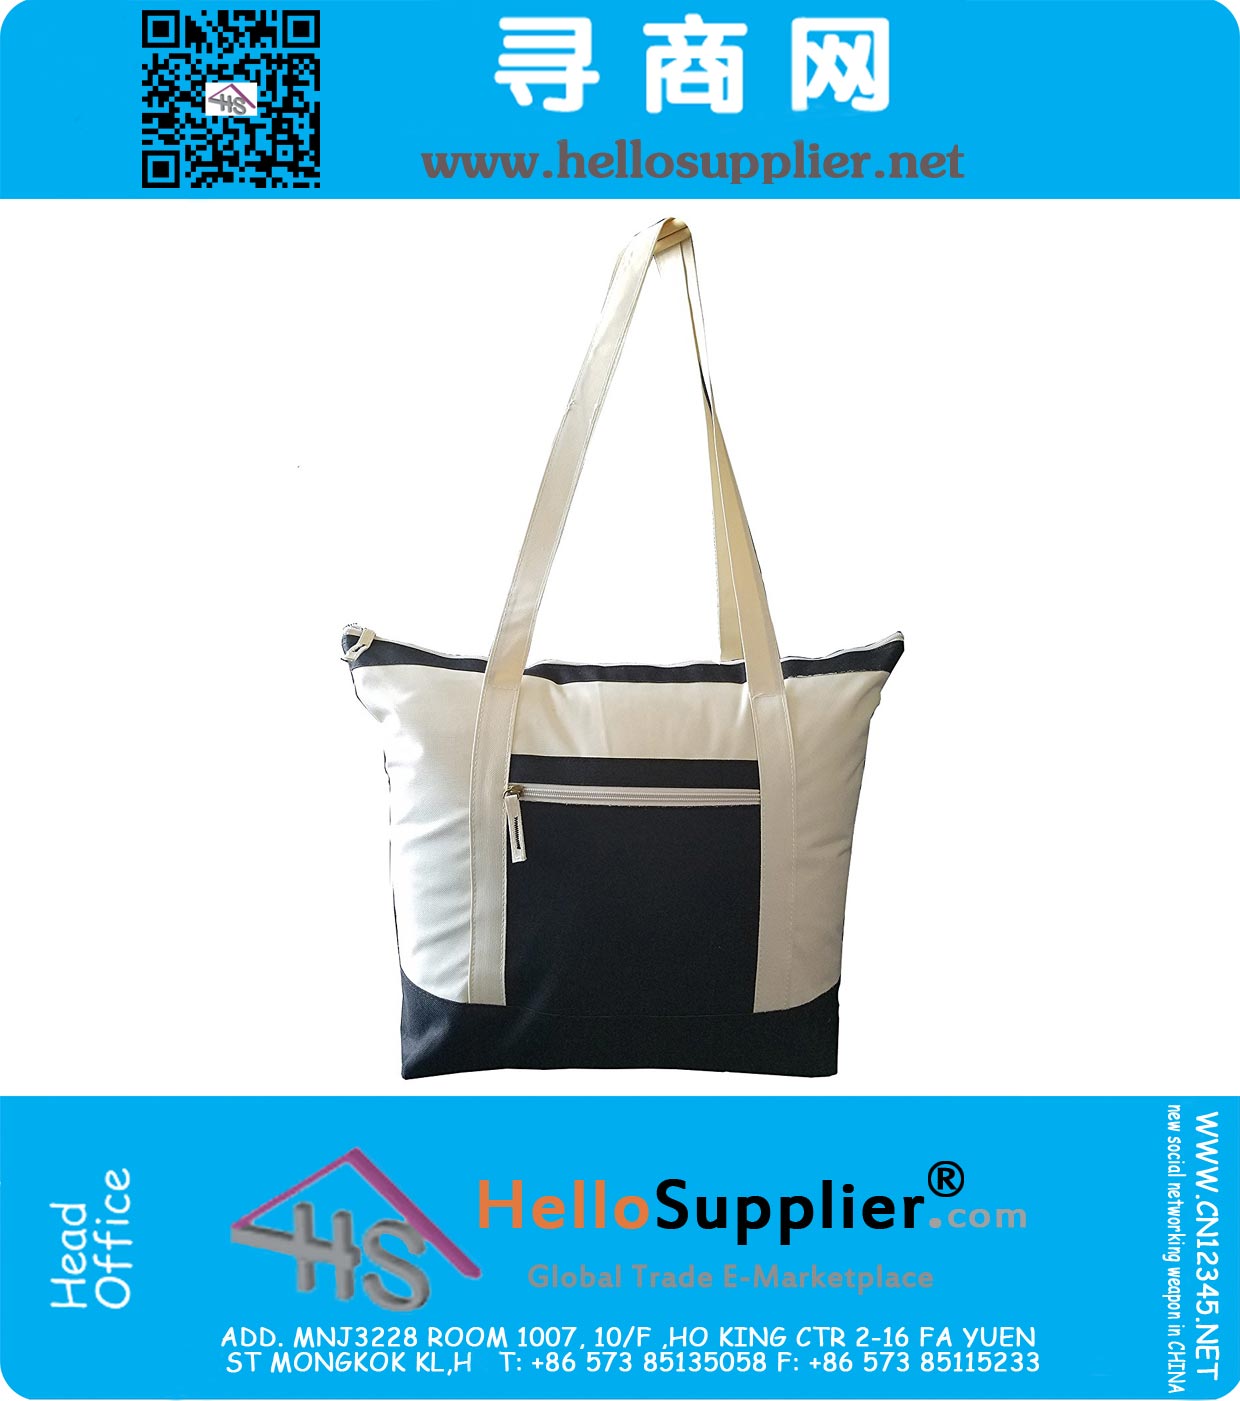 Heavy Duty Deluxe Zippered Poly-Tote, Grocery Bag, Travel Tote Shoulder Bag, Shopping Bag